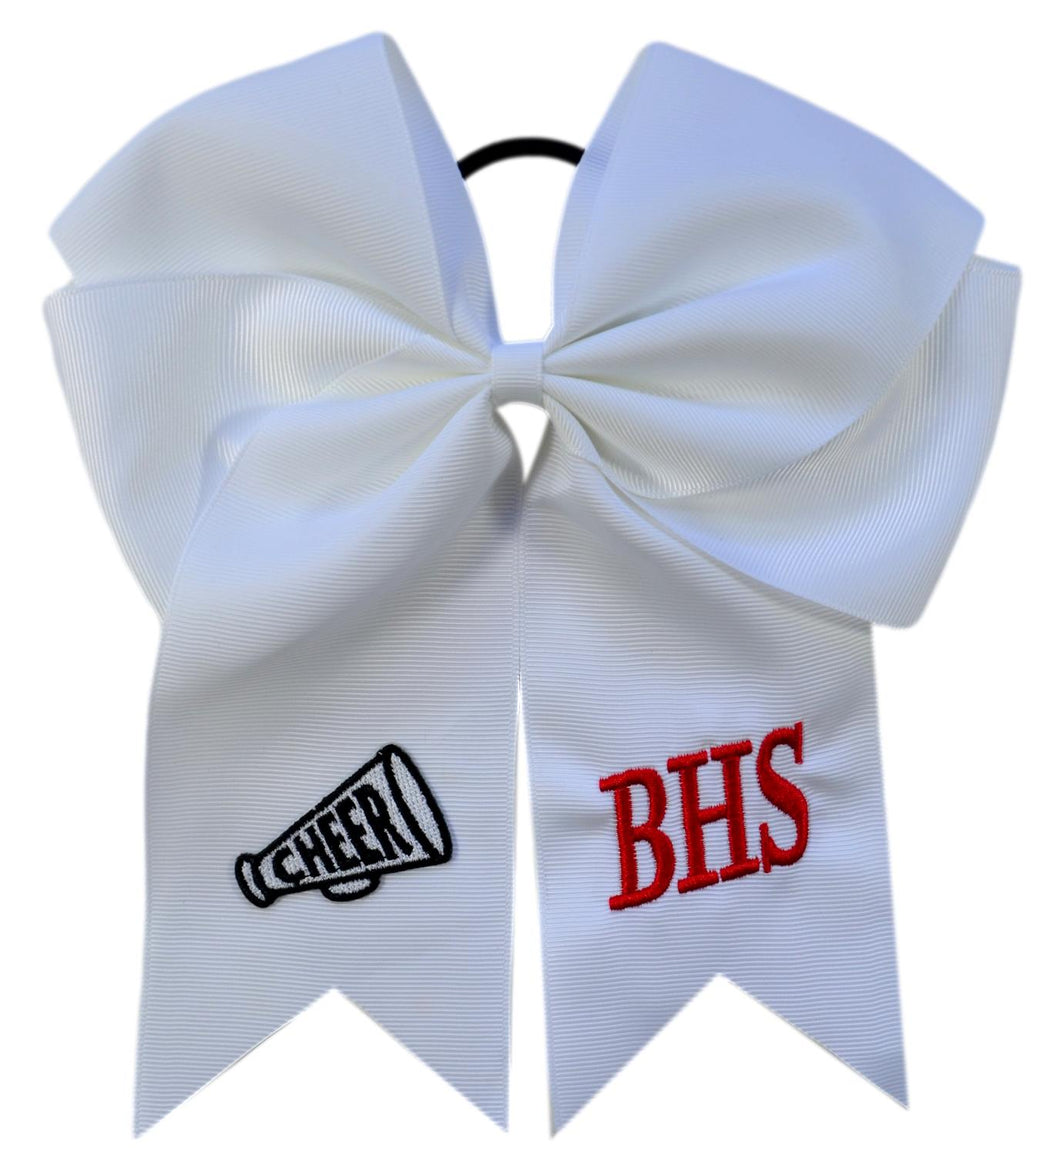 Cheer Megaphone Hair Bow Embroidered and Personalized with Custom Initials of your choice - 7.5 Inches Long!